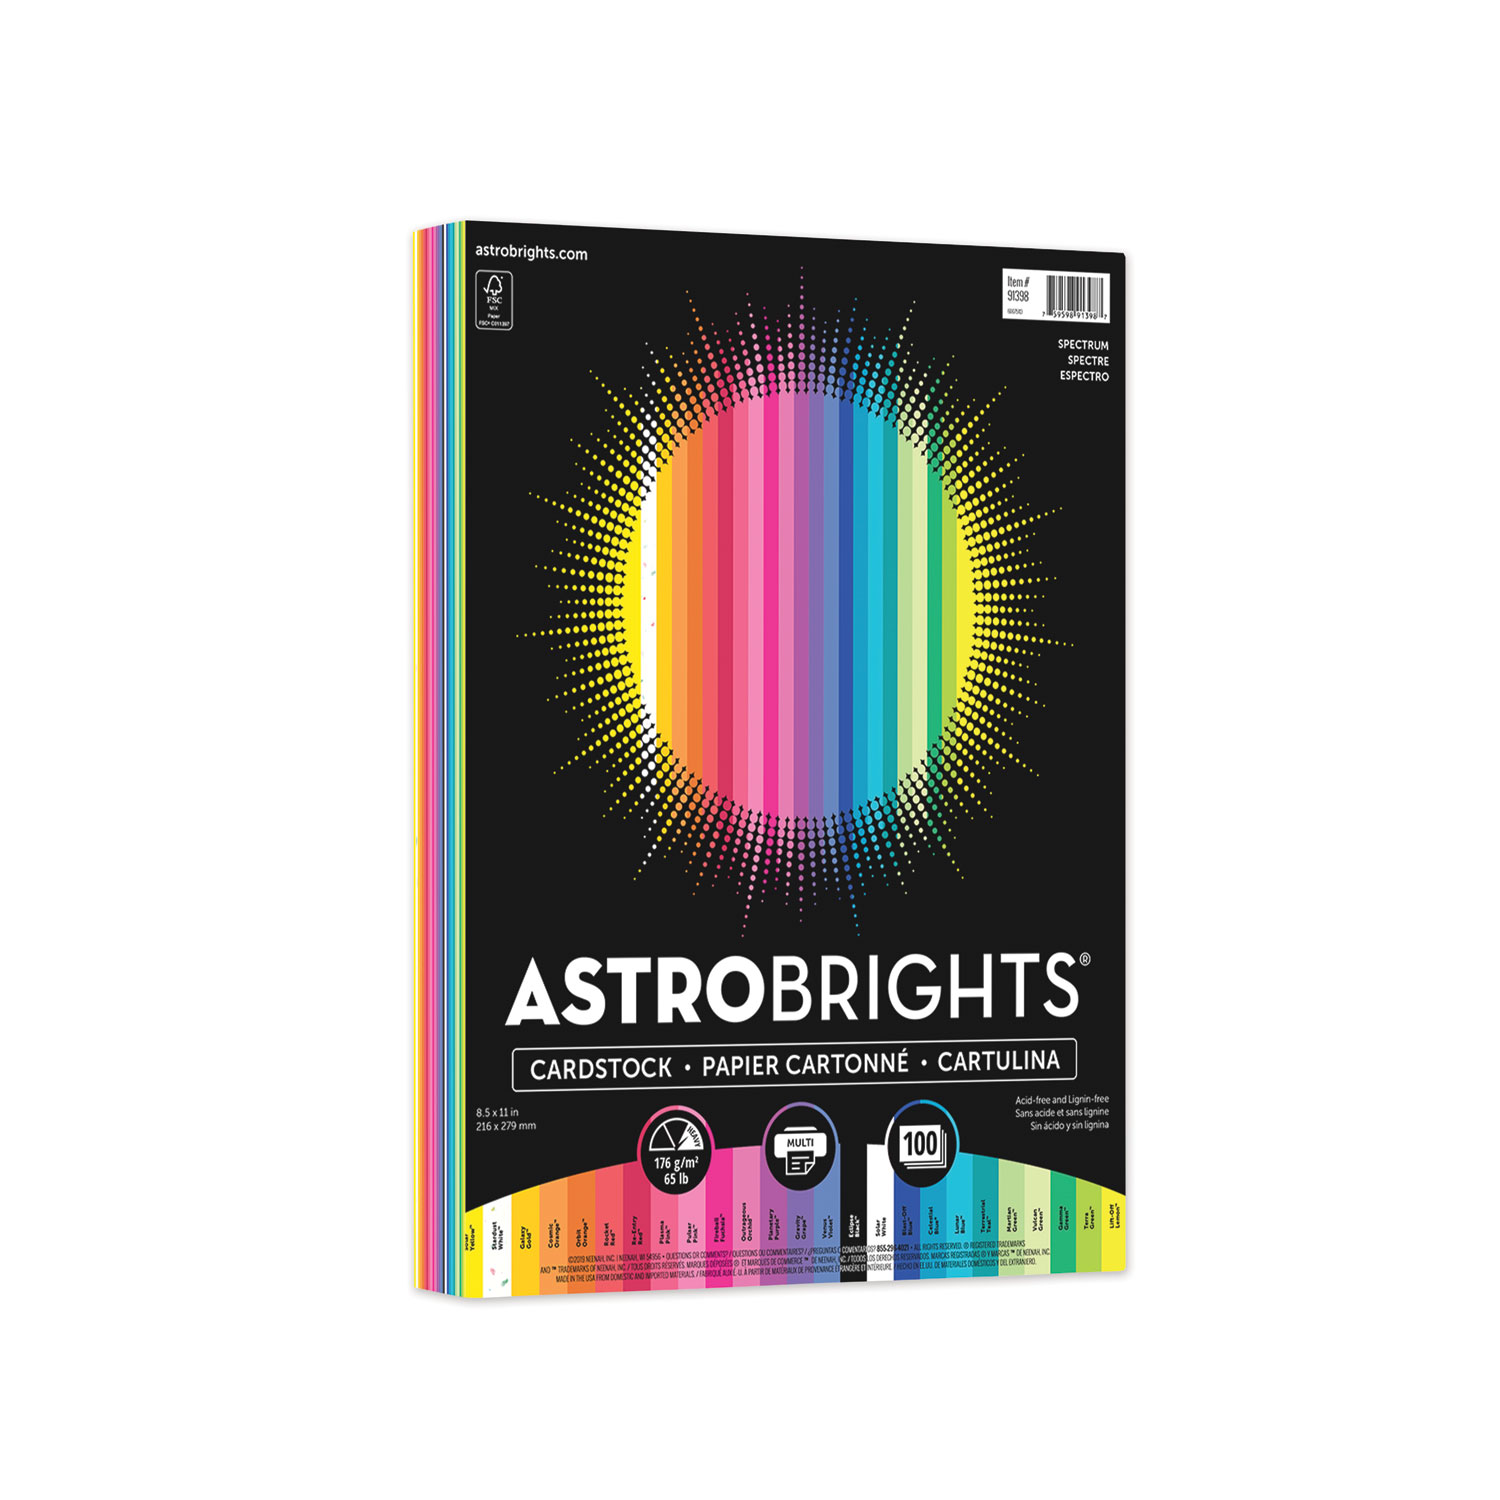  Astrobrights 91398 Color Cardstock, 65 lb, 8.5 x 11, Assorted Colors, 100/Pack (WAU91398) 